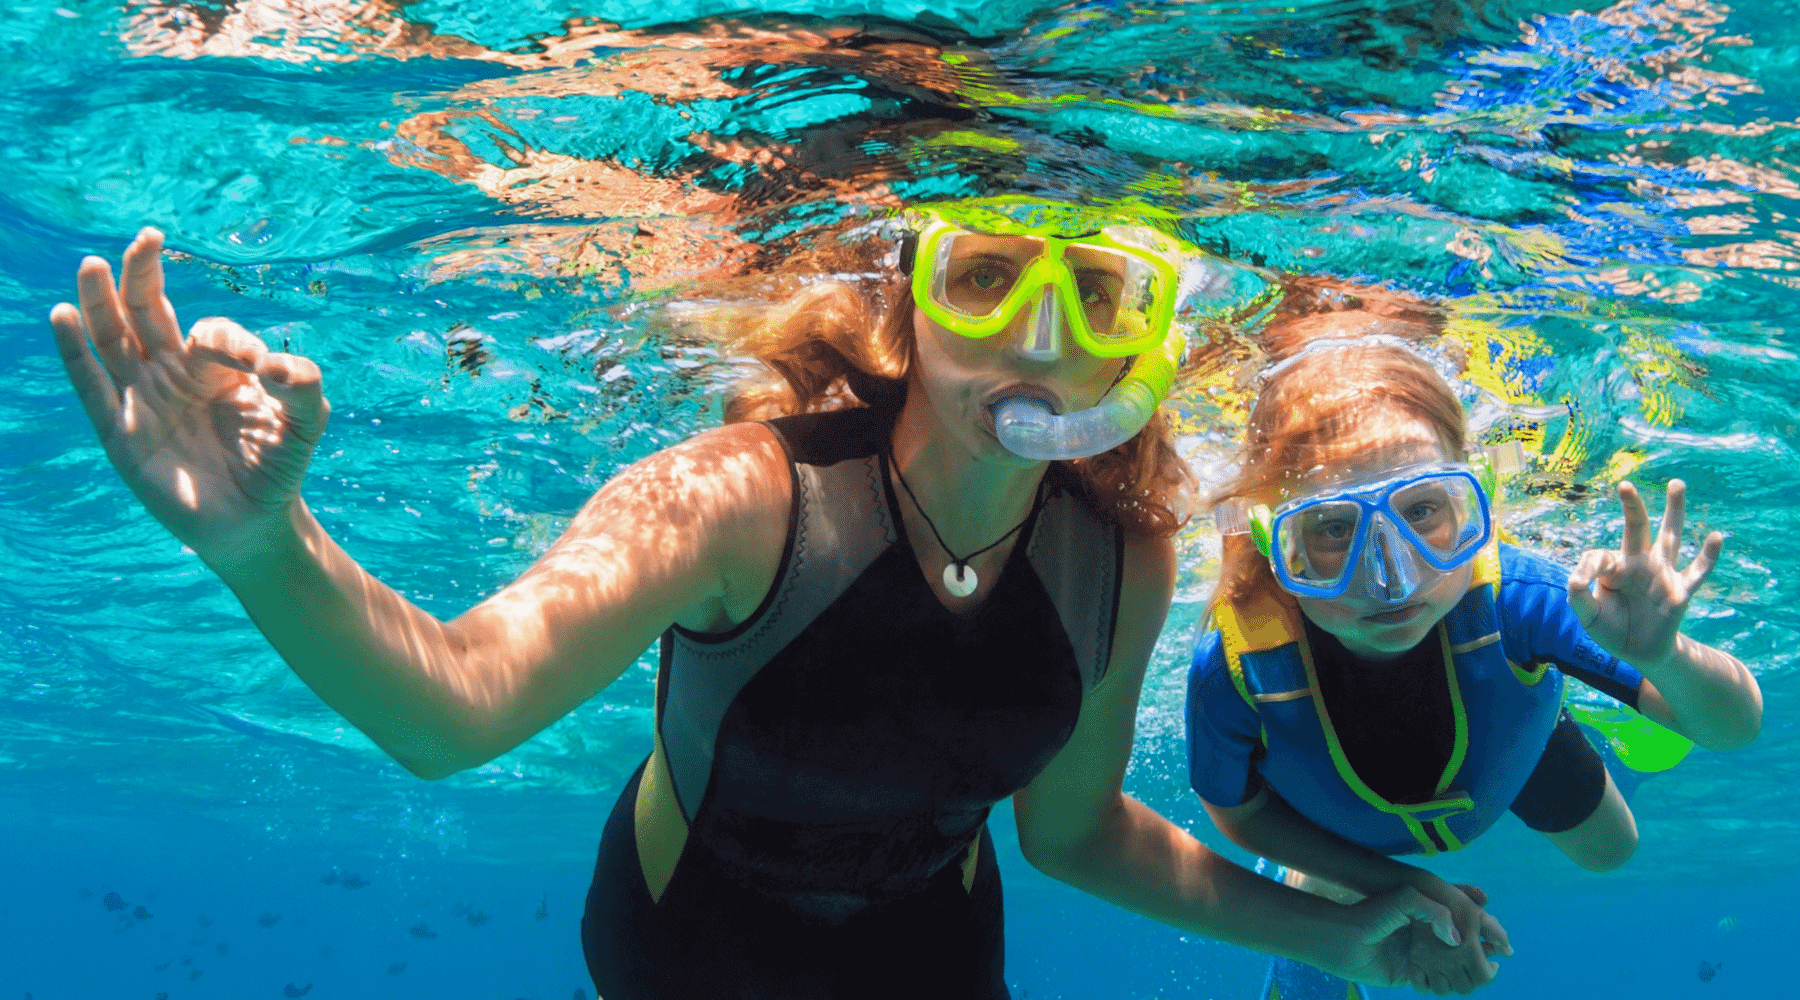 Mother and daughter enjoy their swim goggles with nose cover for looking around under water.